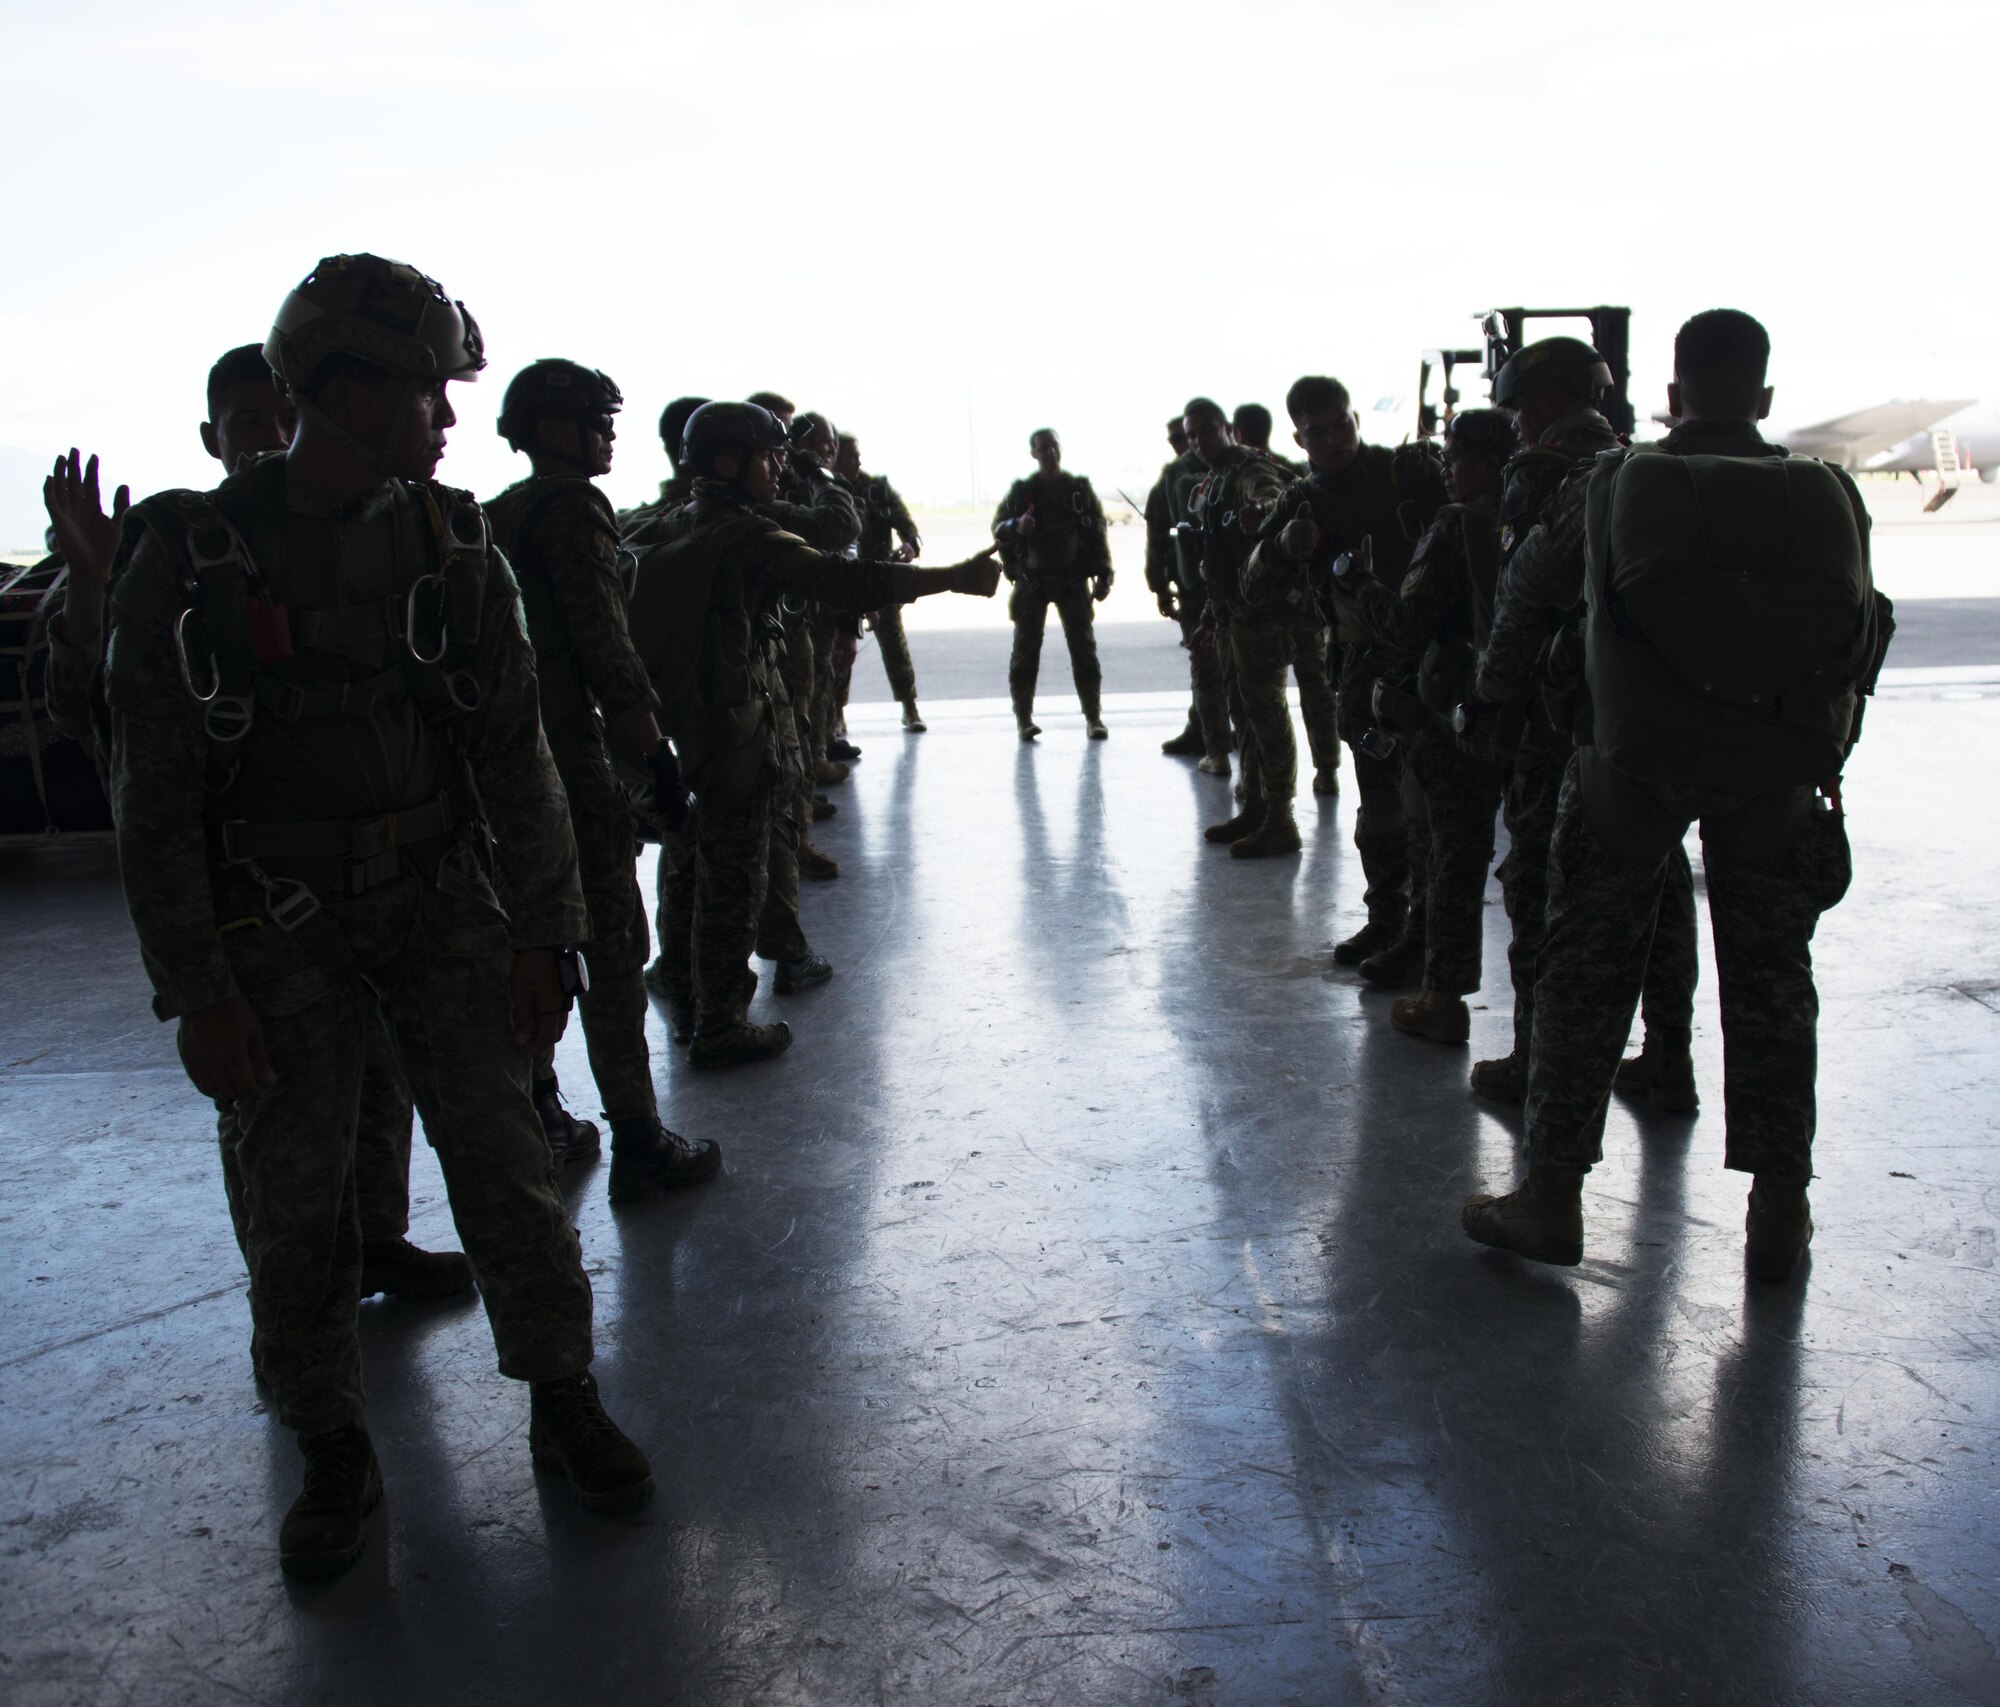 Members from Operational Detachment Alpha (ODA) 1324 and Philippine Army Light Reaction Regiment (LRR) prepare for high-altitude, low-opening (HALO) airdrops from a MC-130H Combat Talon II at Clark Air Base, Sept. 24. The 1st Special Forces Group Airborne is responsible for providing Special Forces operators to the Pacific Command (PACOM) area of responsibility. (U.S. Air Force photo by Capt. Jessica Tait)